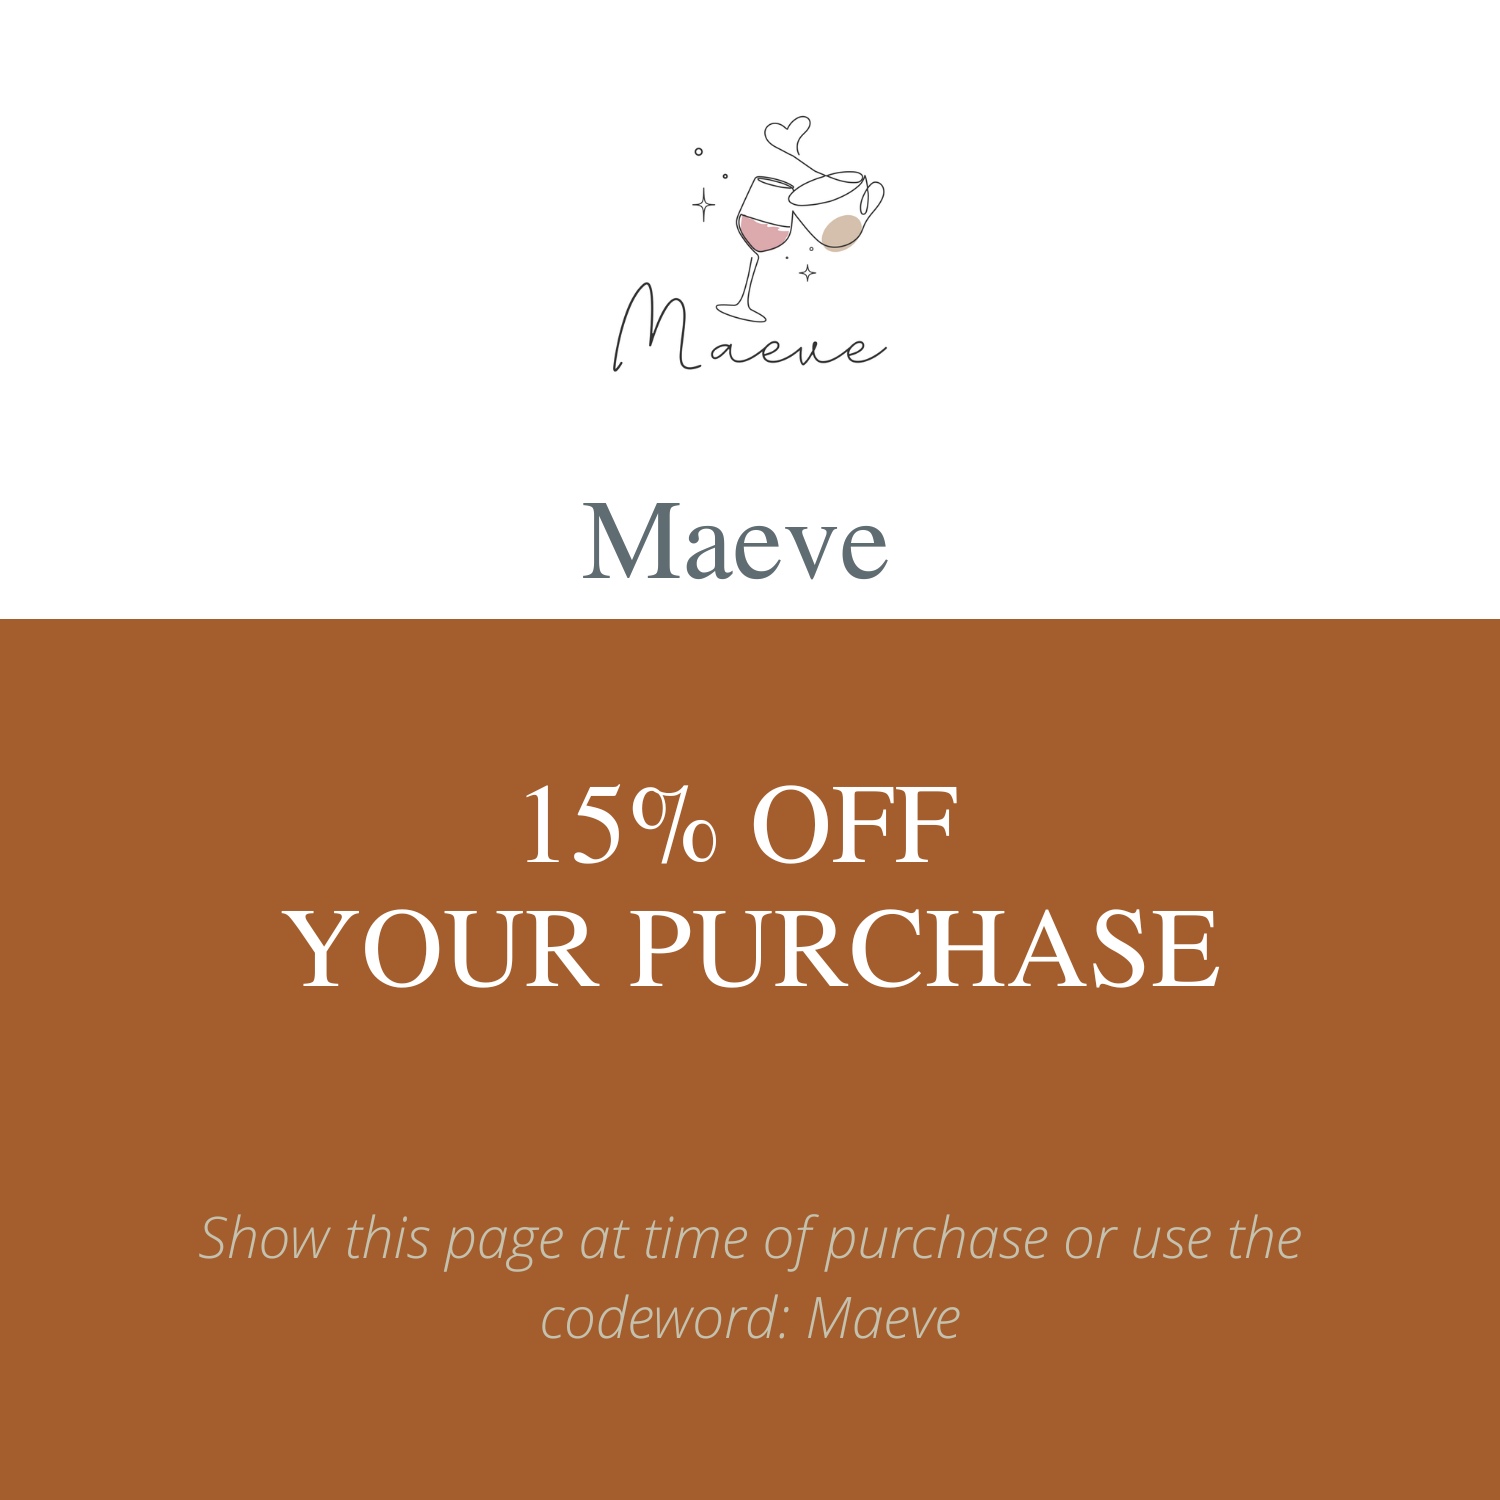 Maeve Wine and Coffee 15% off flyer